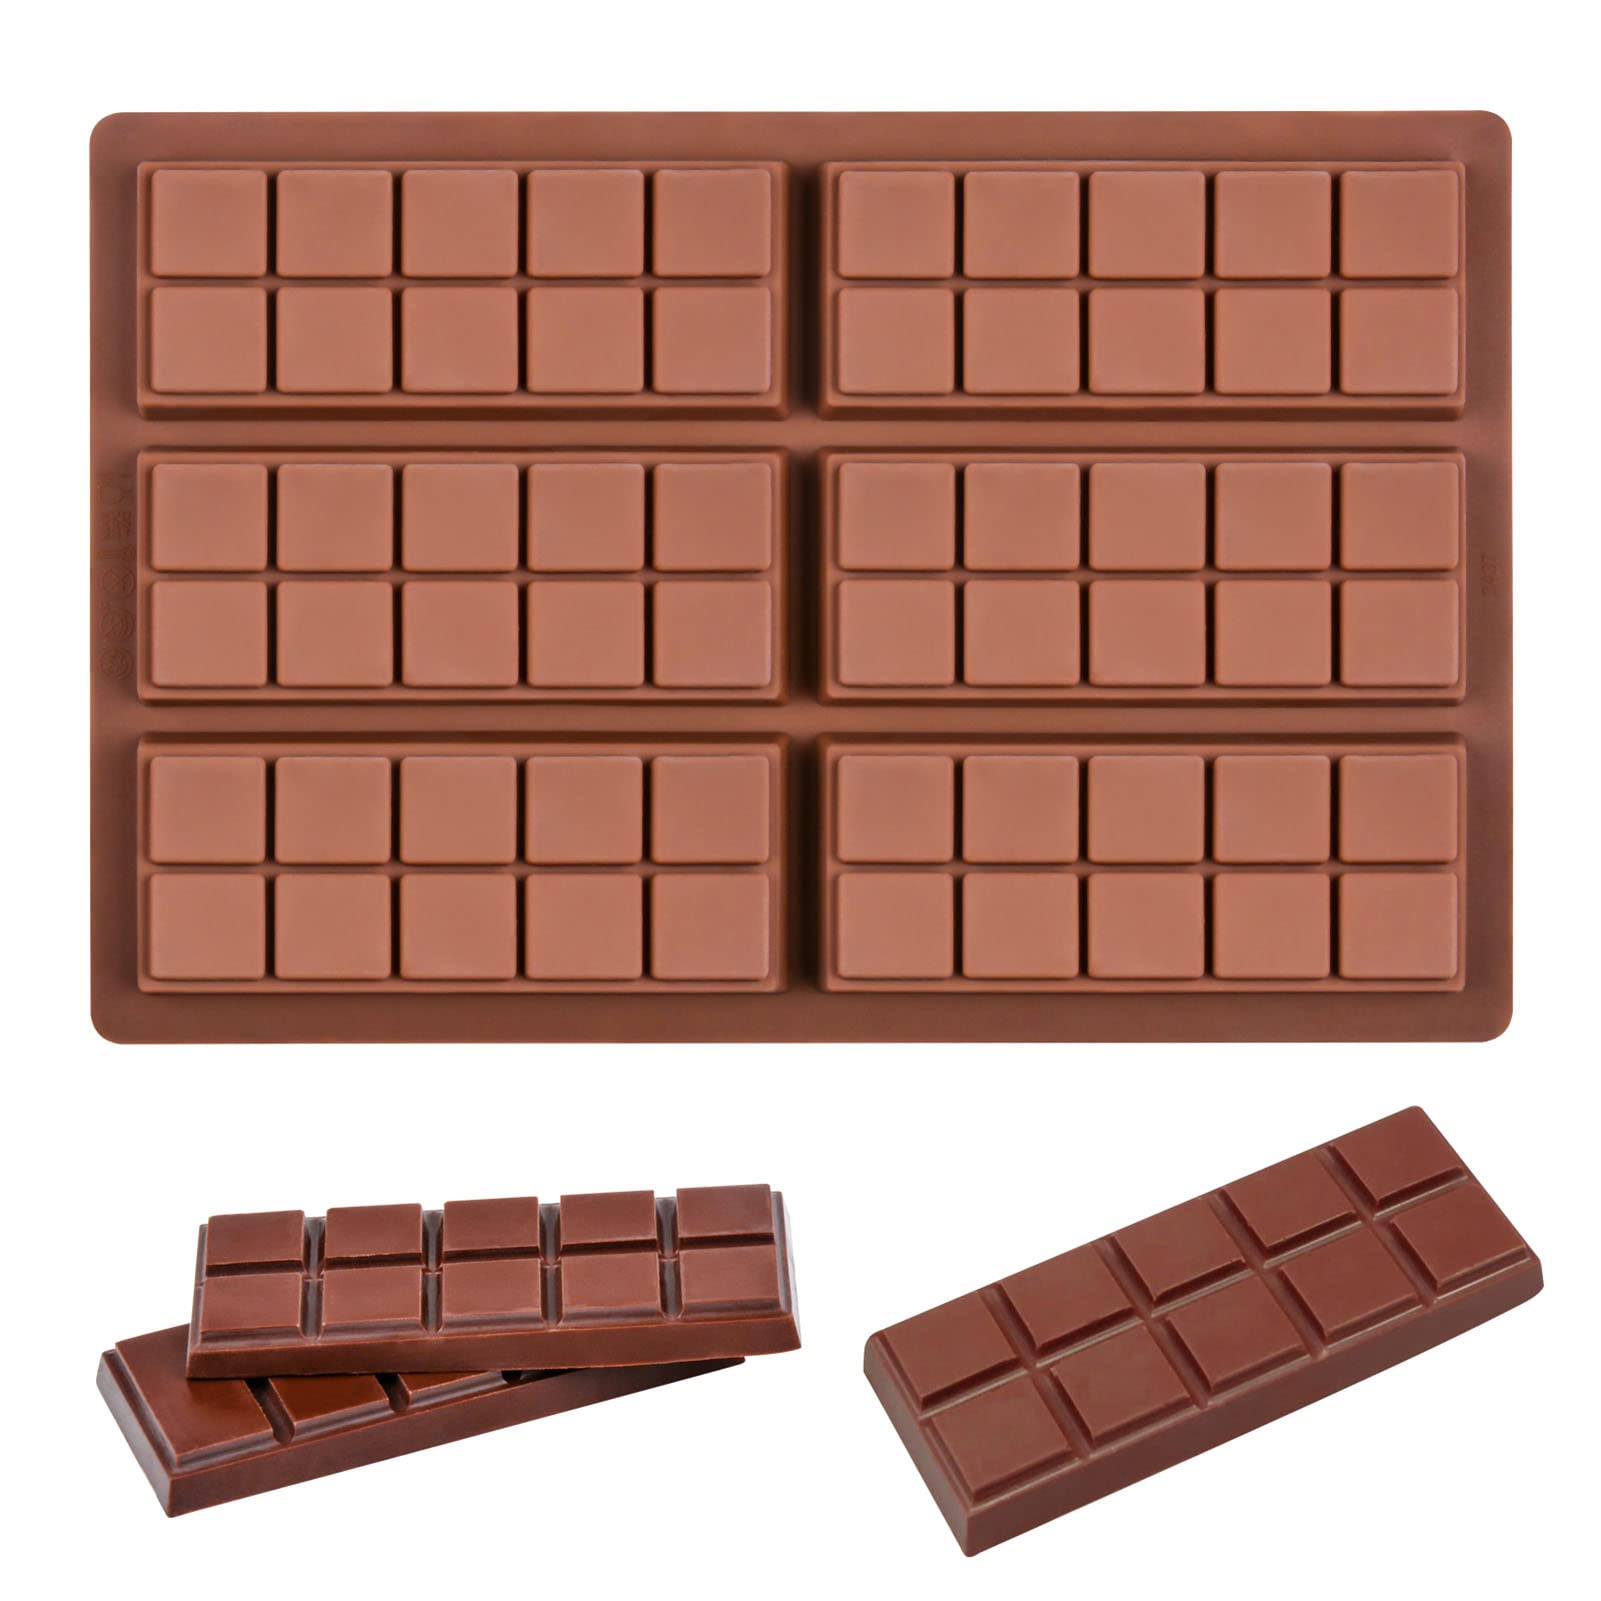 Fimary Chocolate Molds, Rectangle Chocolate Bar Sweet Molds Silicone Bakeware Wax Melt Molds, Pack of 1